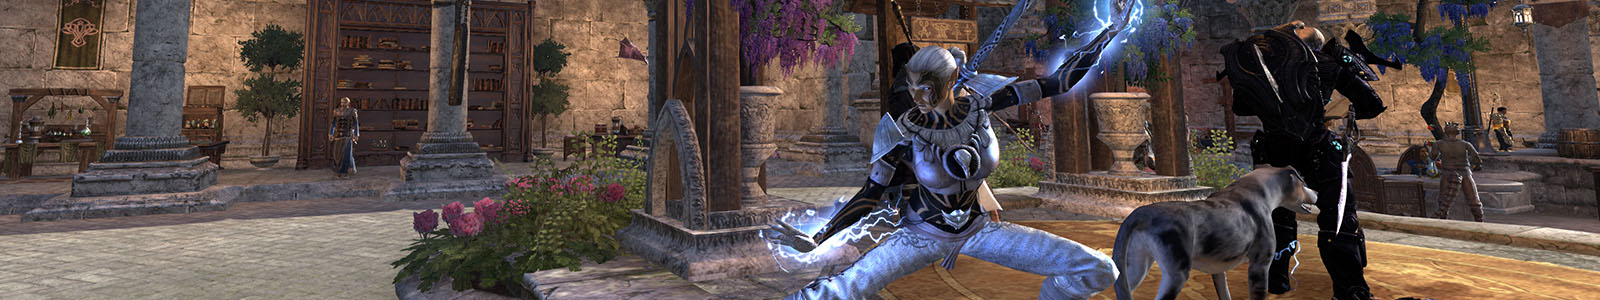 Sit and Drink - ESO header